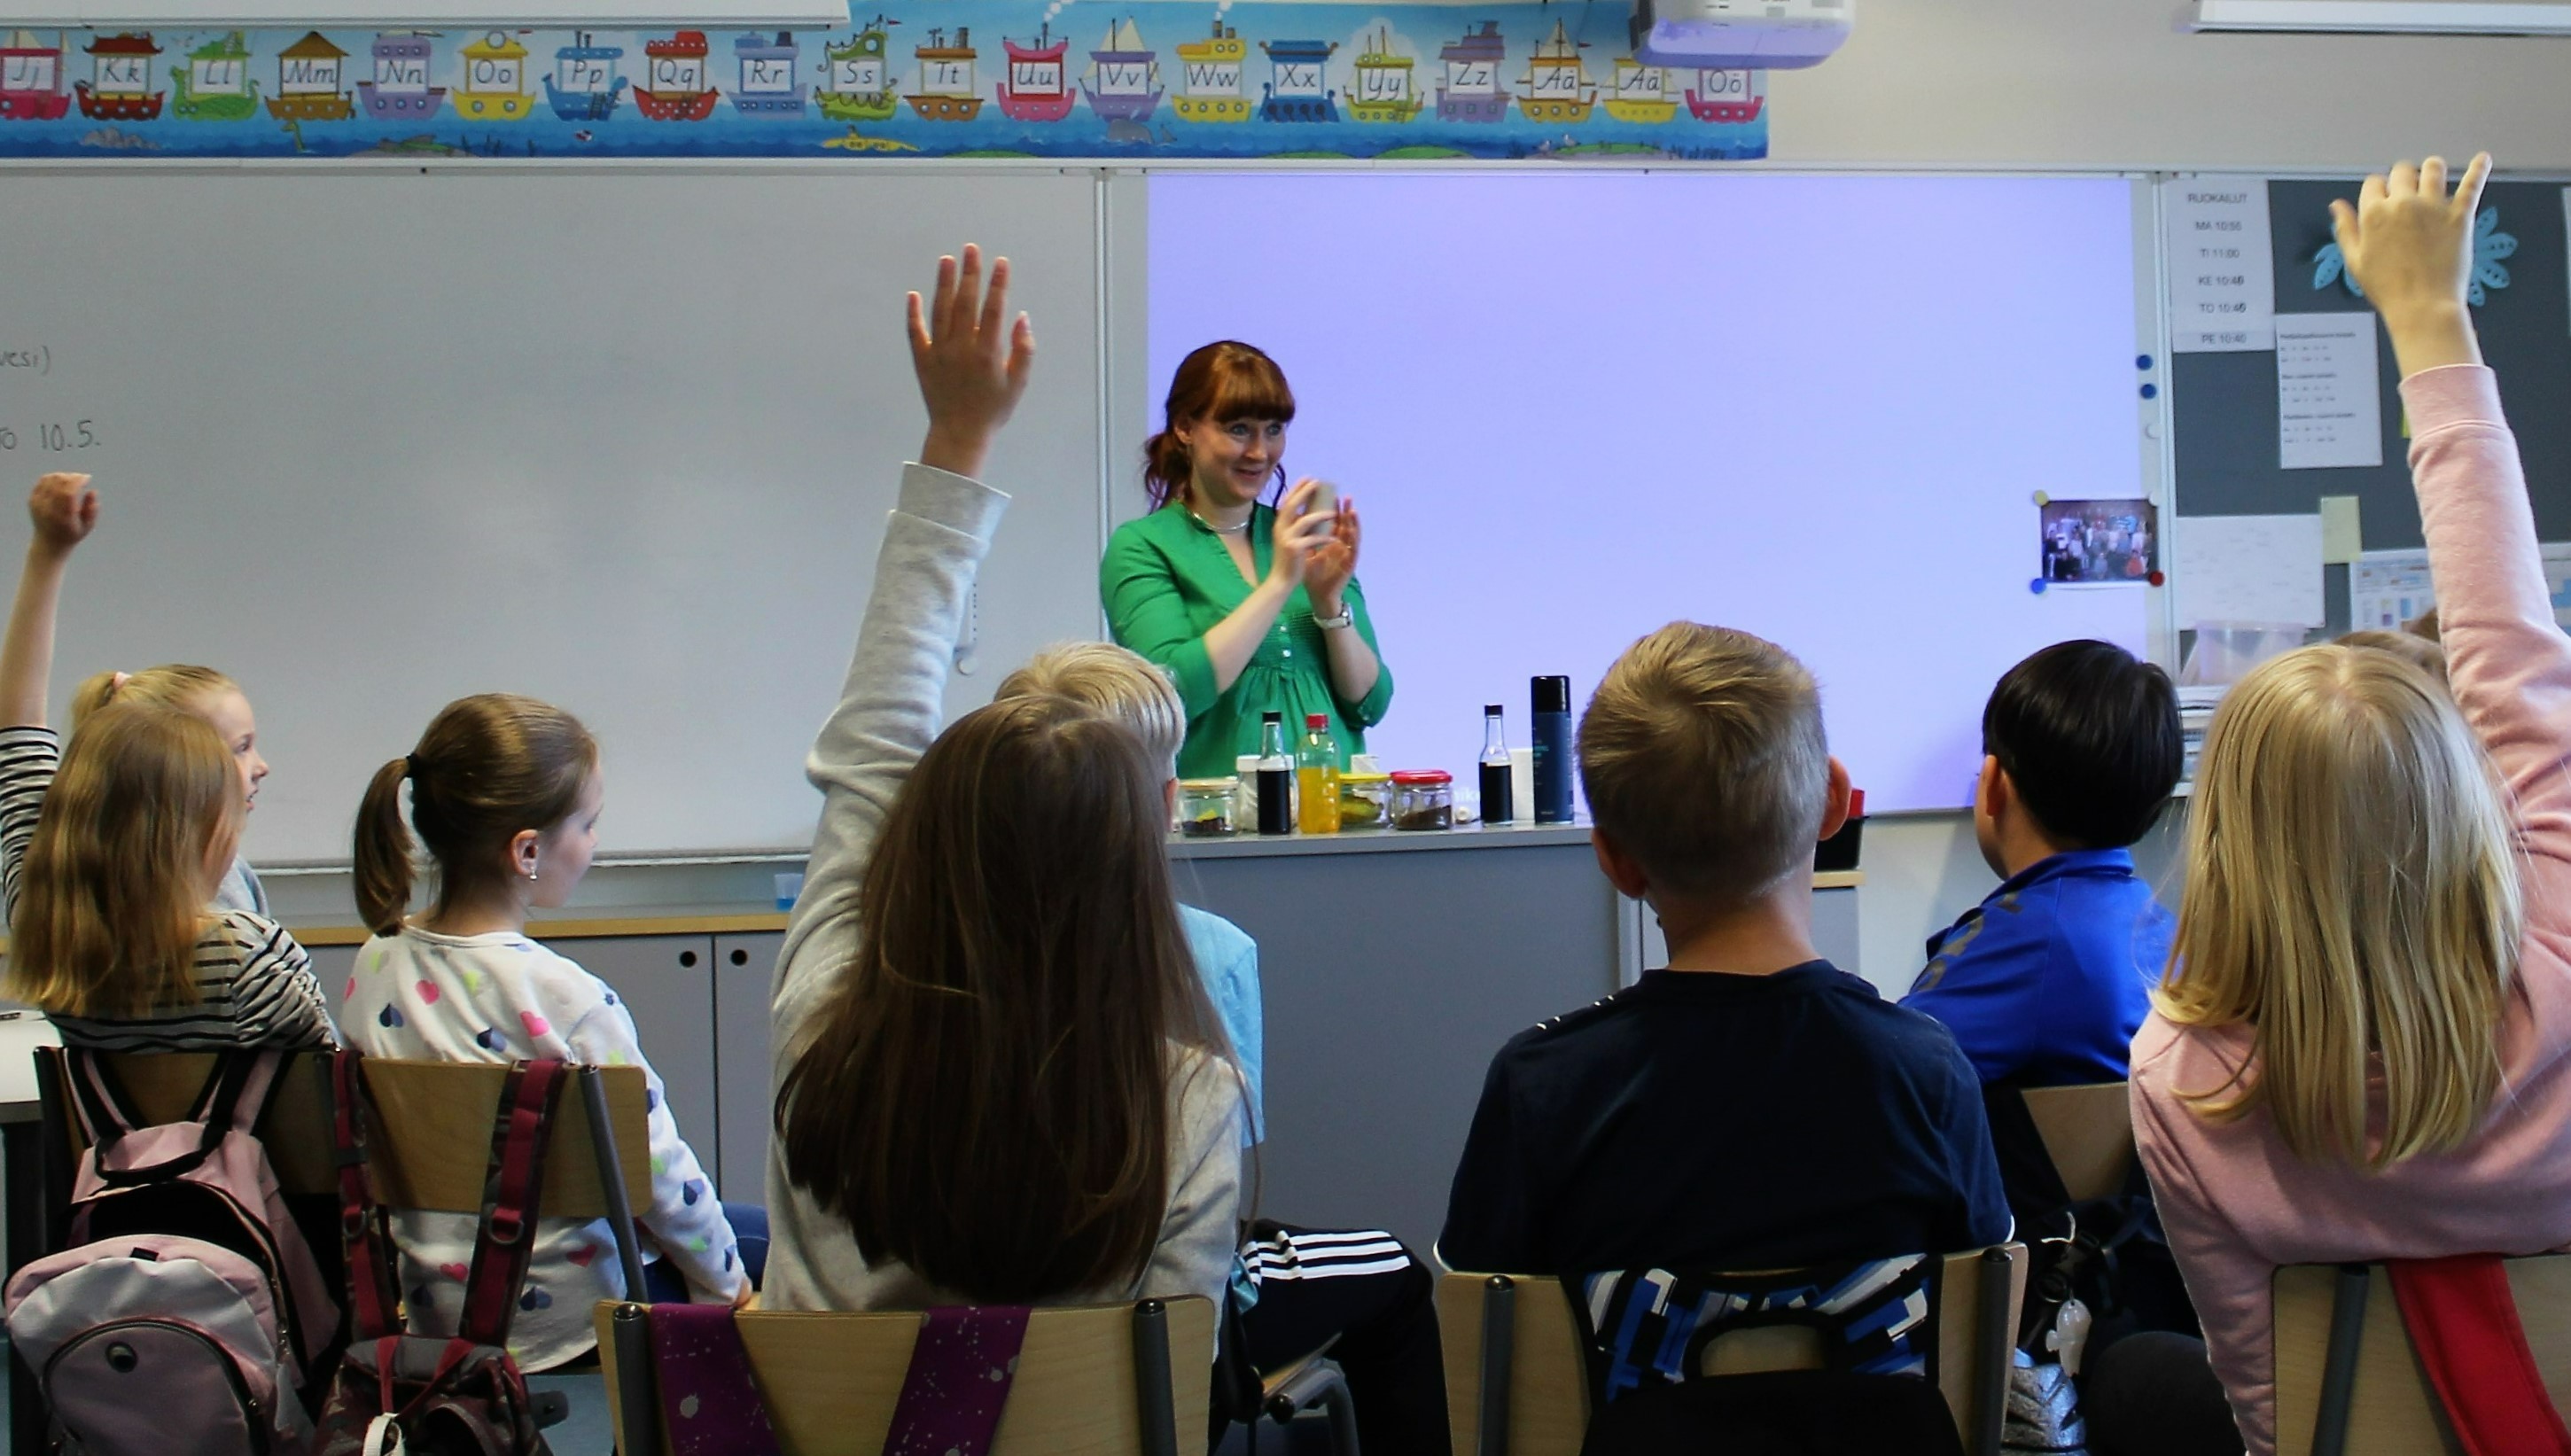 Students in a classroom. The teacher is in the front of the room, smiling in the direction of the students.